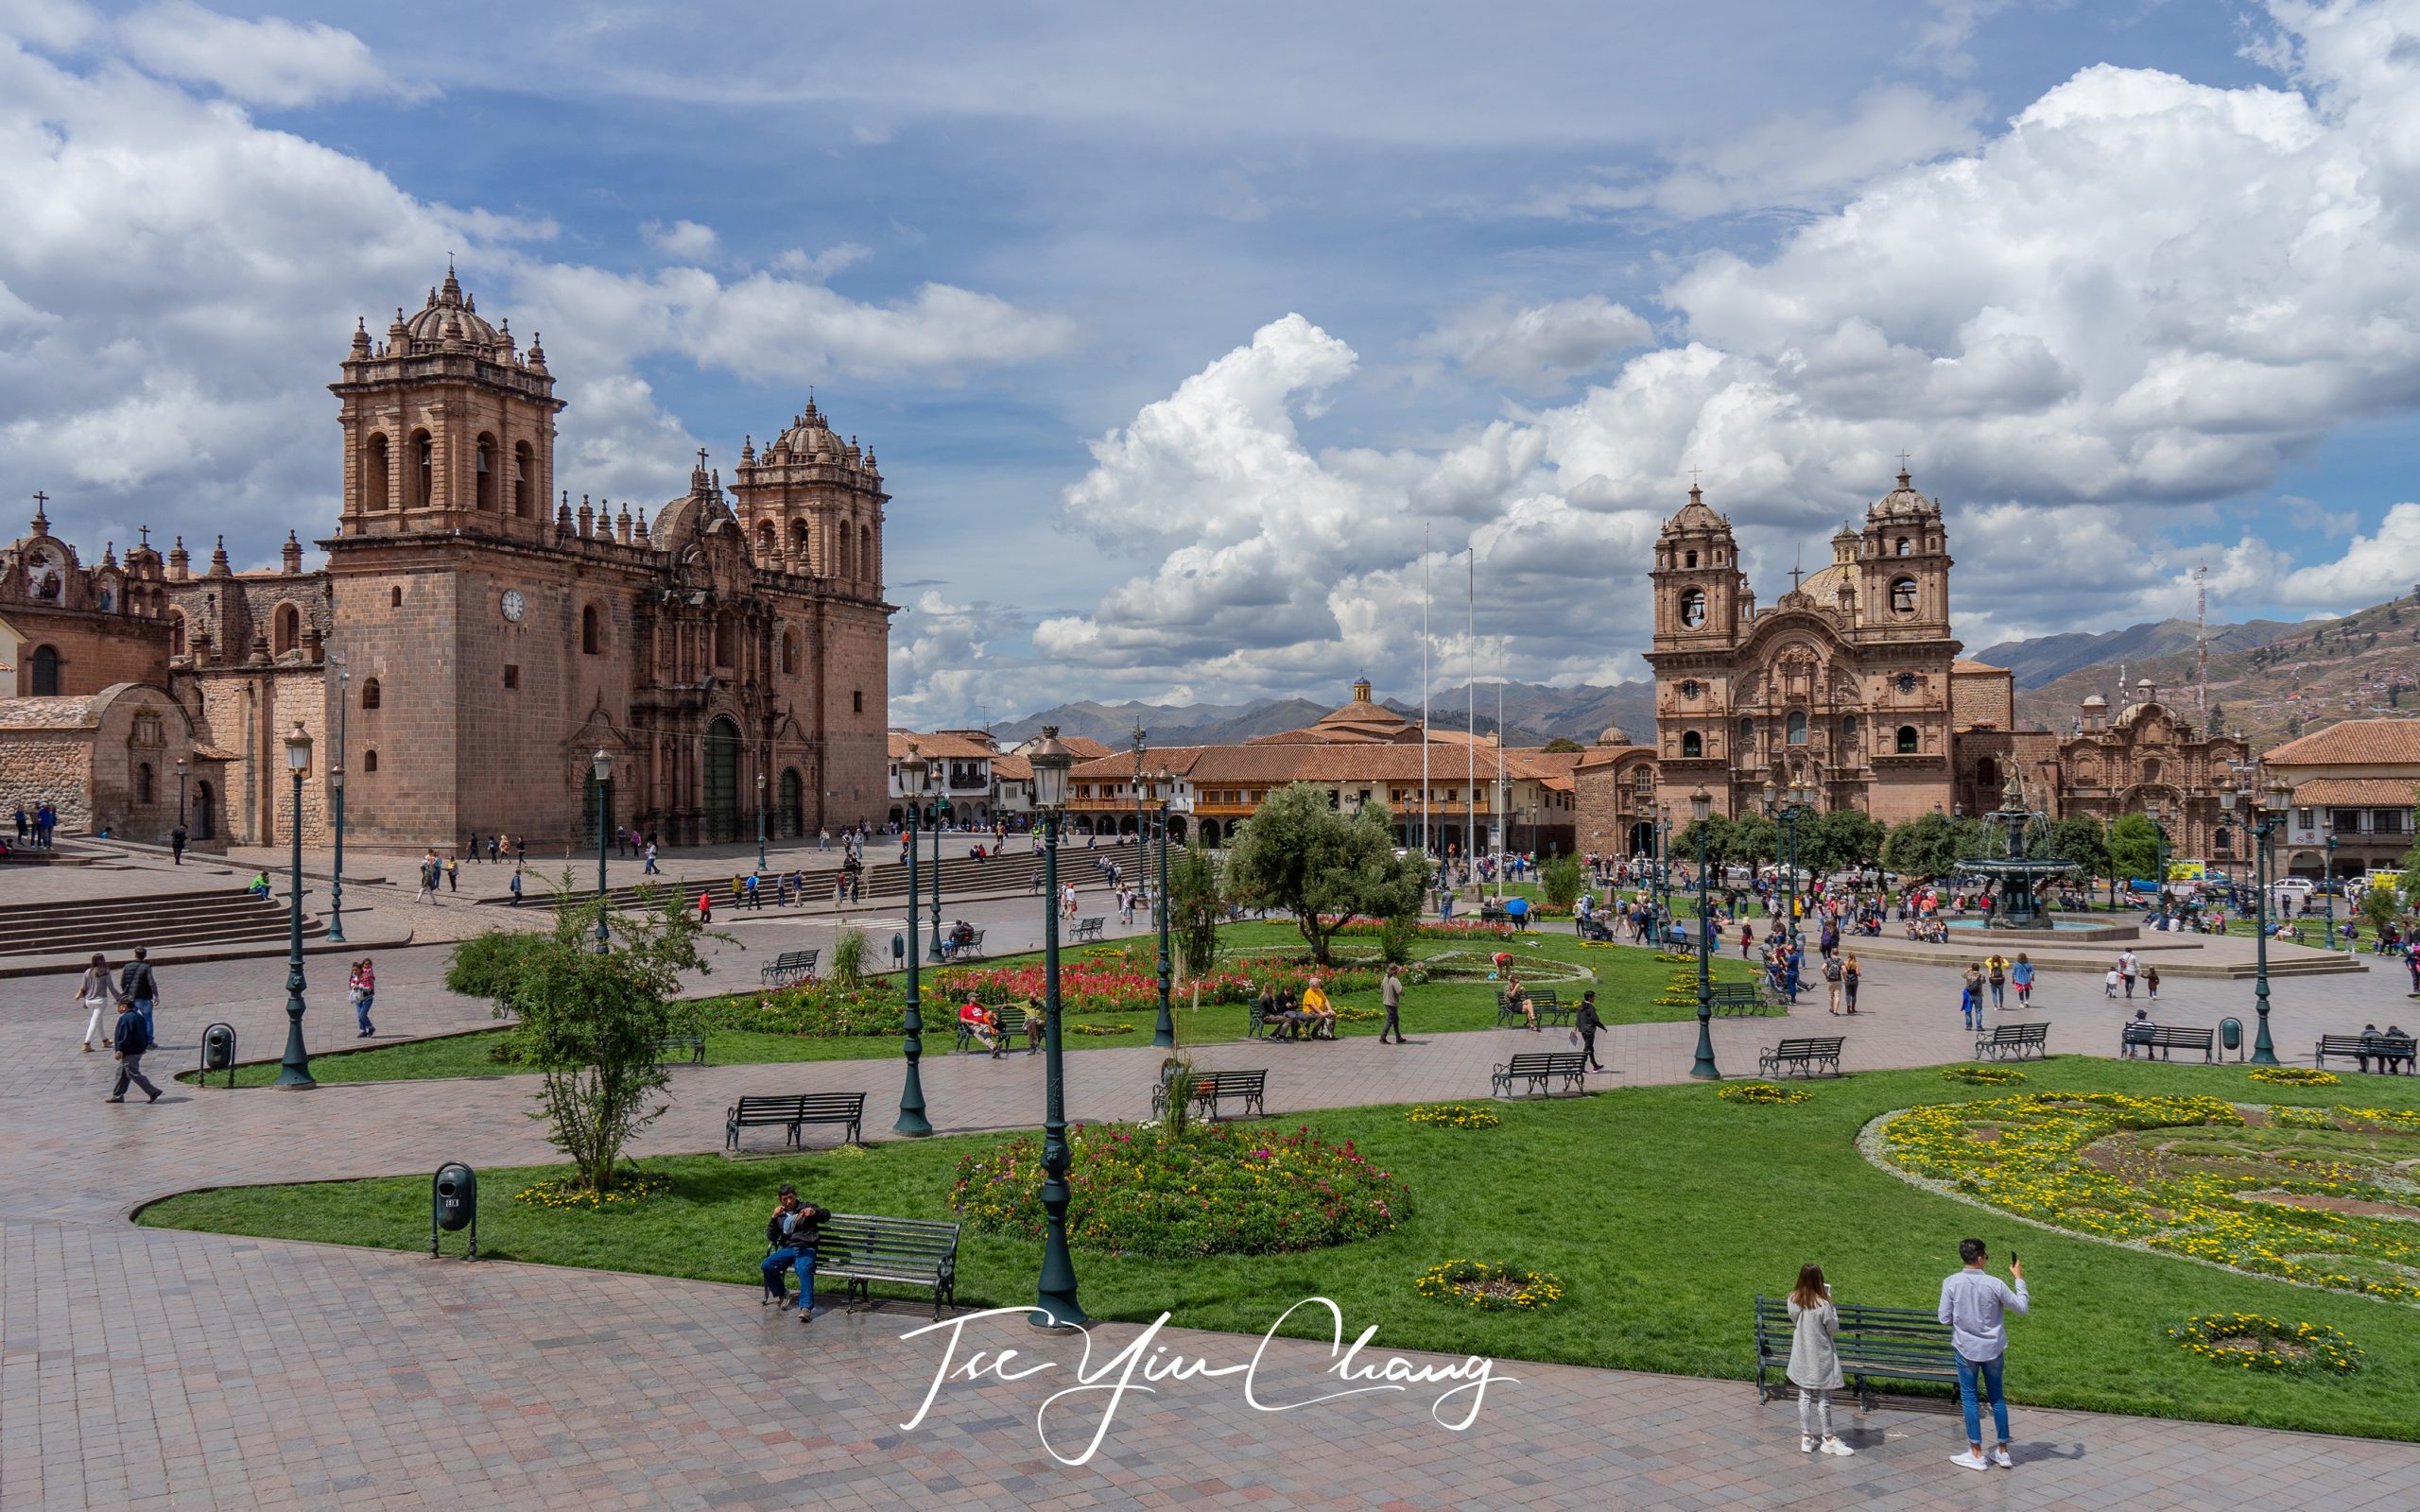 Cusco's old city, the grand square of Plaza de Armas has been landscaped with grass, flowerbeds and fountains making it a pleasant place to sit and watch the locals pass. On the left is Cusco Cathedral and on the right is the Church of the Society of Jesus